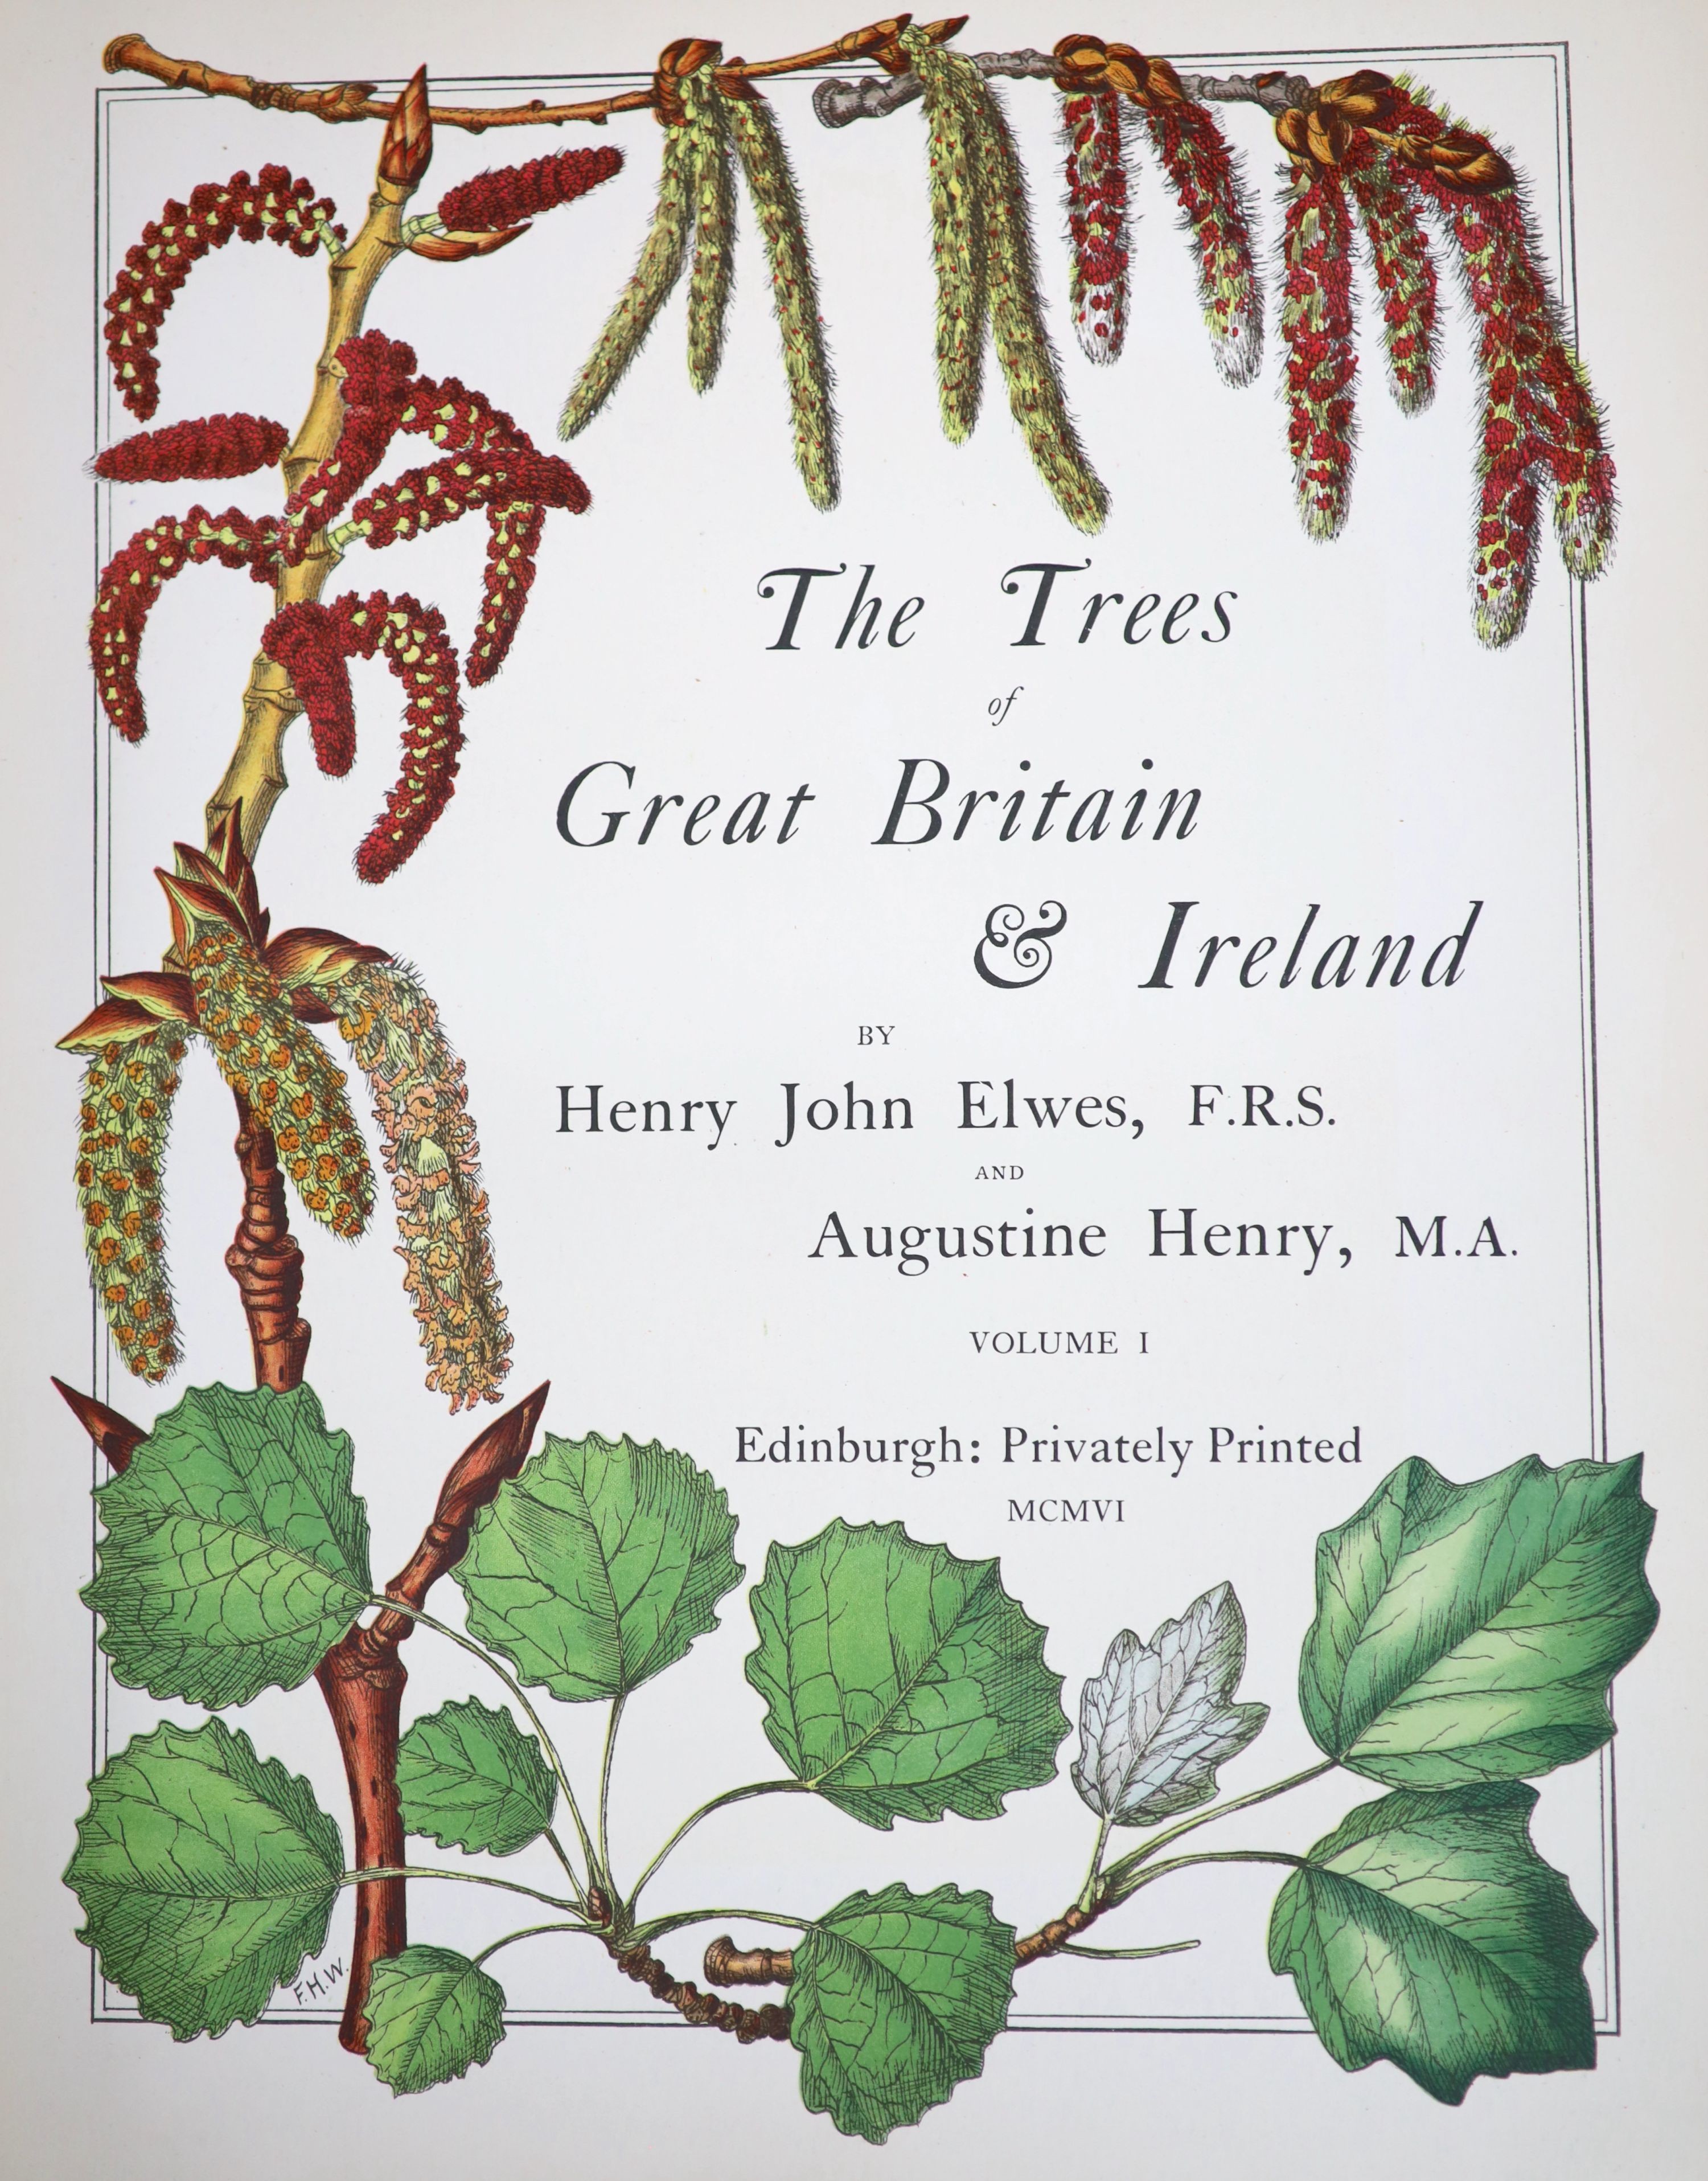 Elwes, Henry John and Henry, Augustine - The Trees of Great Britain and Ireland, 8 vols including index, contemporary green half morocco, spines faded, 7 colour titles, 412 plates, bookplate of Edward Hudson, Lindisfarne